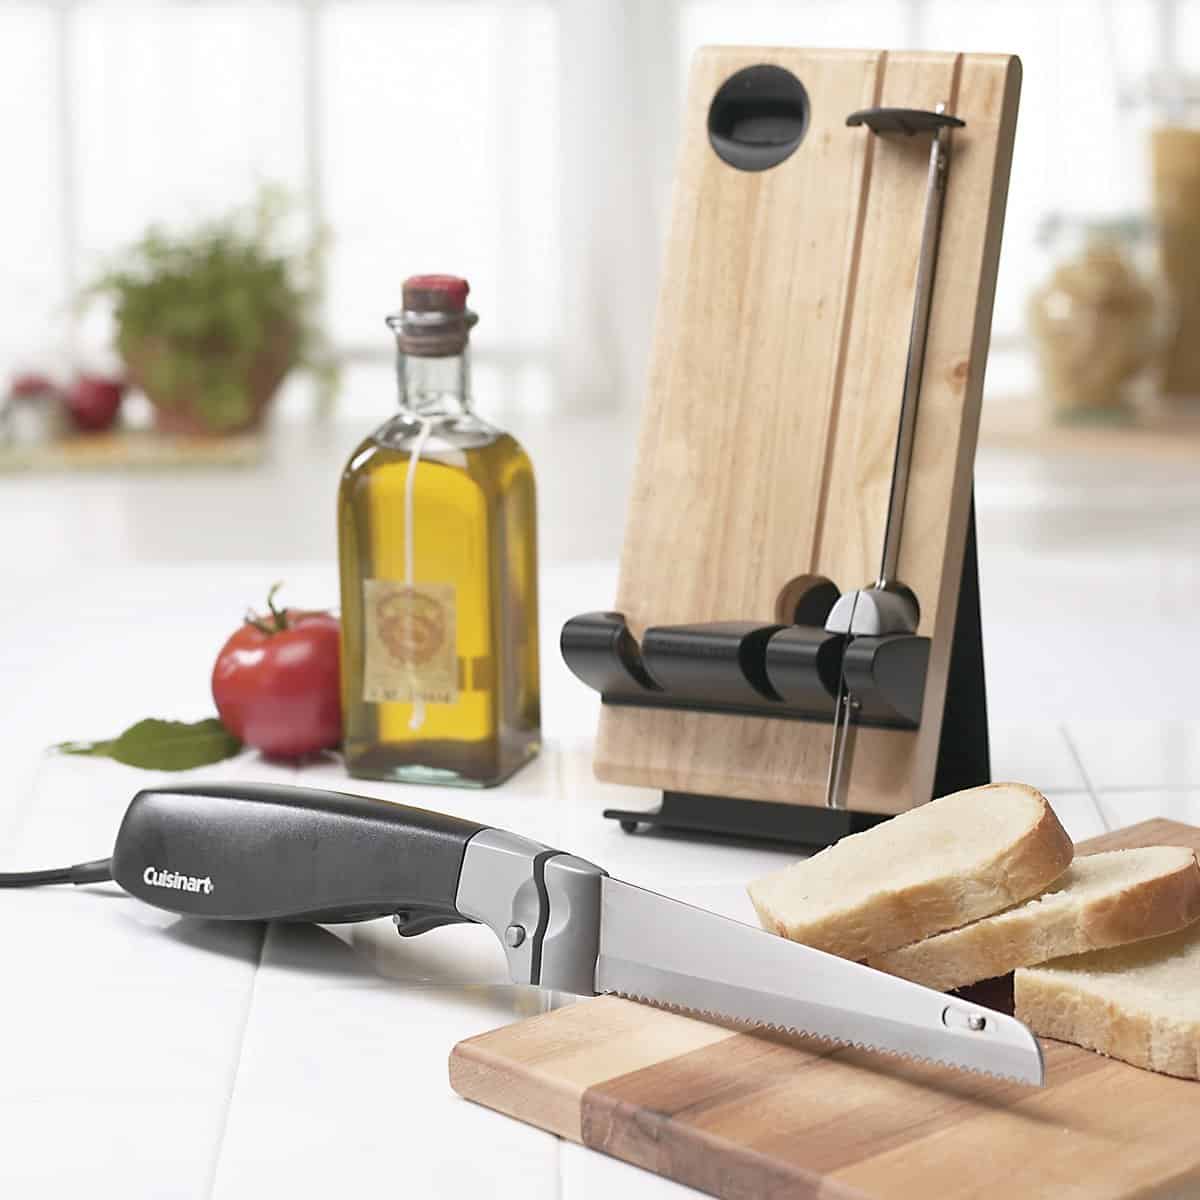 Cuisinart Powerful Electric Knife - One-Touch Operation - Ergonomic Handle  - Black Finish - Ideal for Right and Left Handers - Specialty Small Kitchen